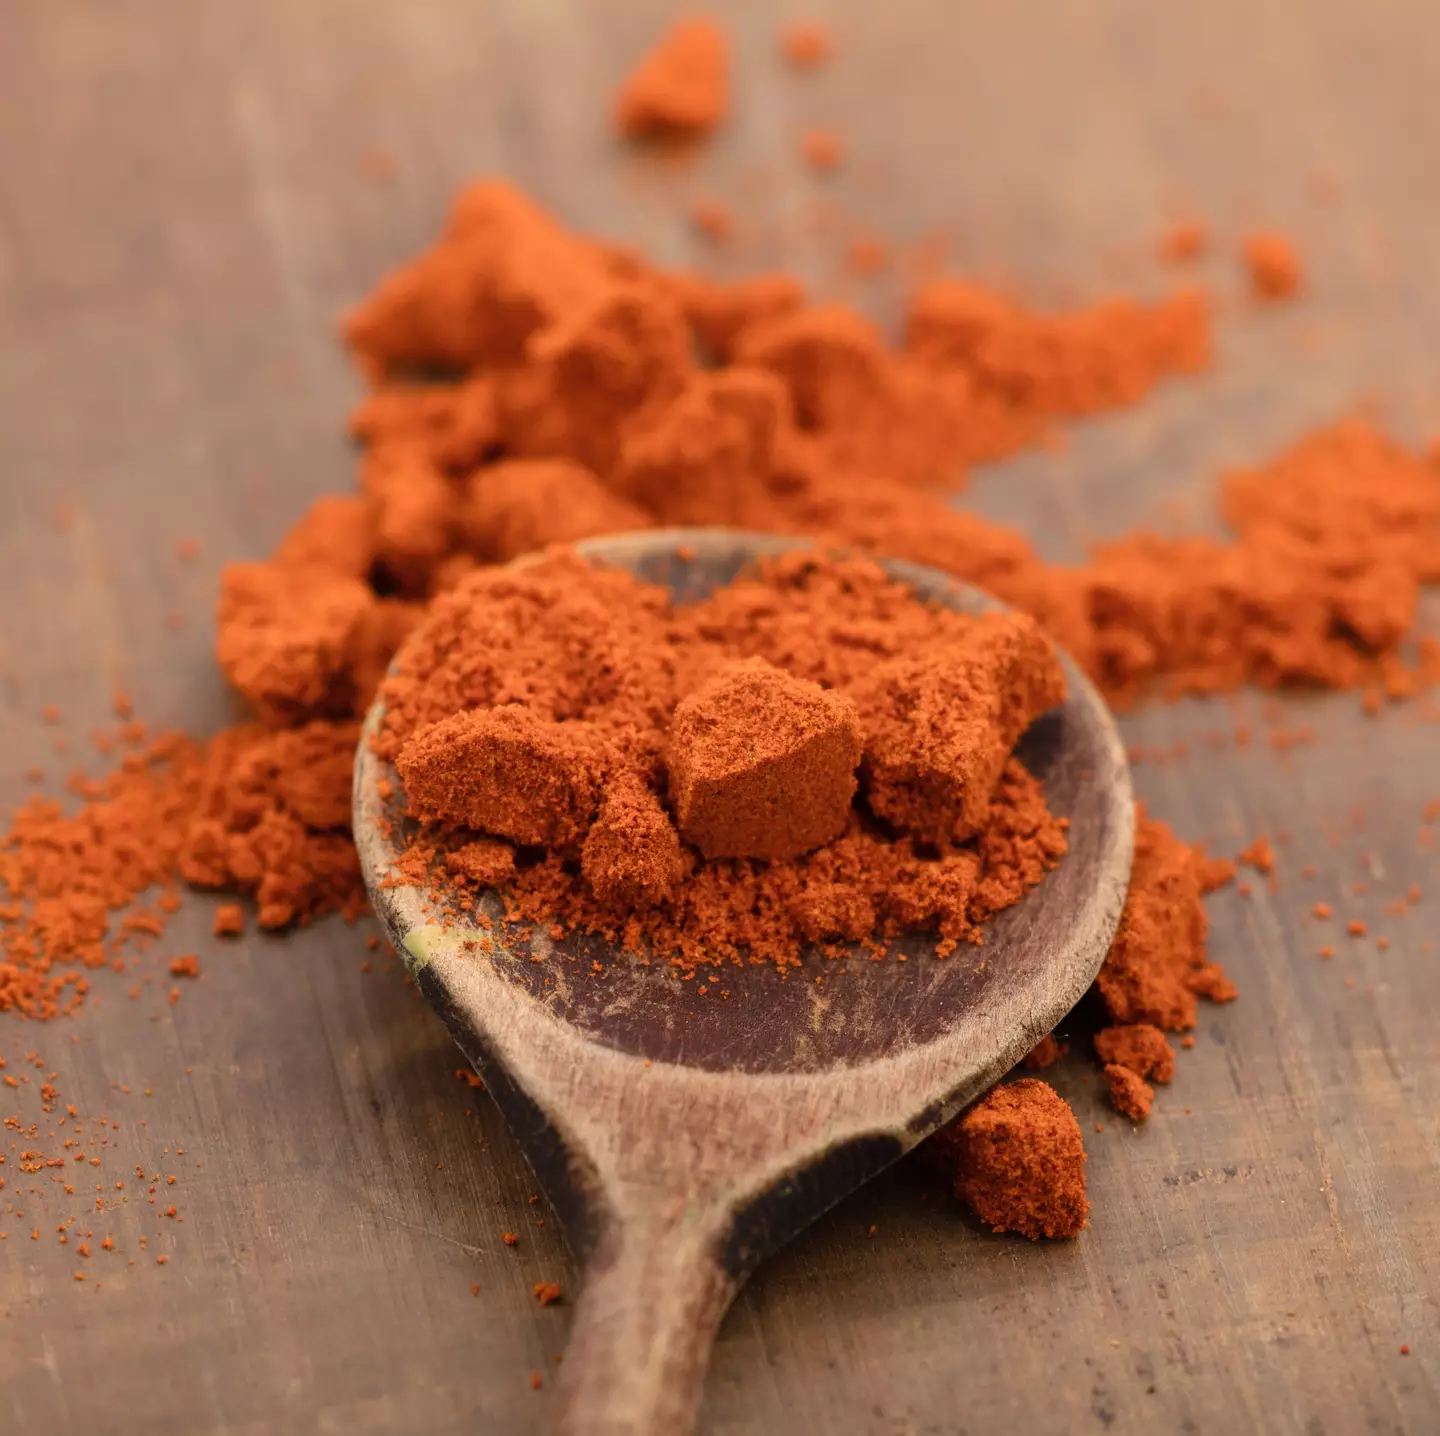 Do you know what paprika is made from?